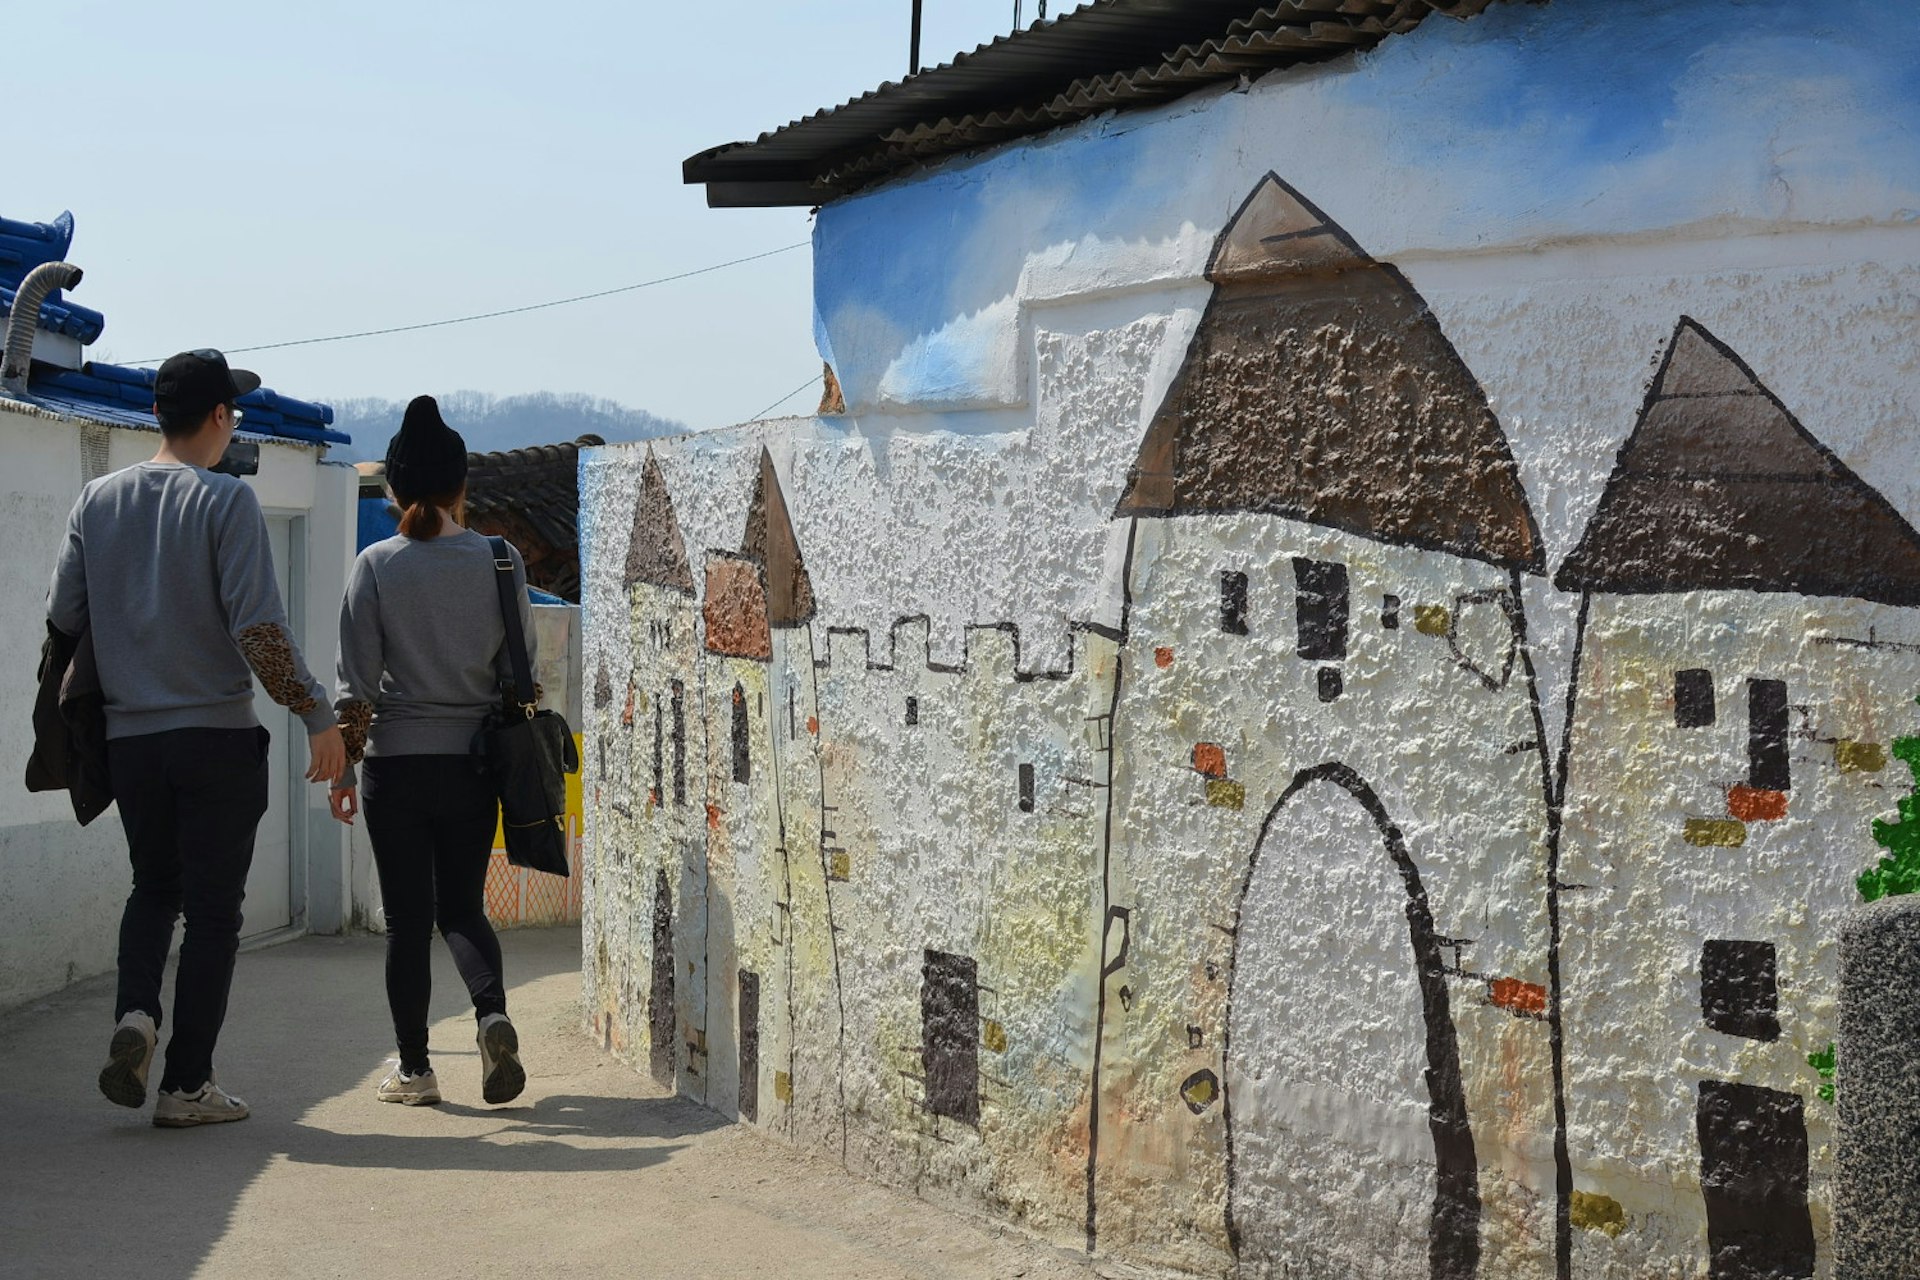 Whimsical towers adorn the streets of Jeonju Jaman Village. Image by Rebecca Milner / Lonely Planet